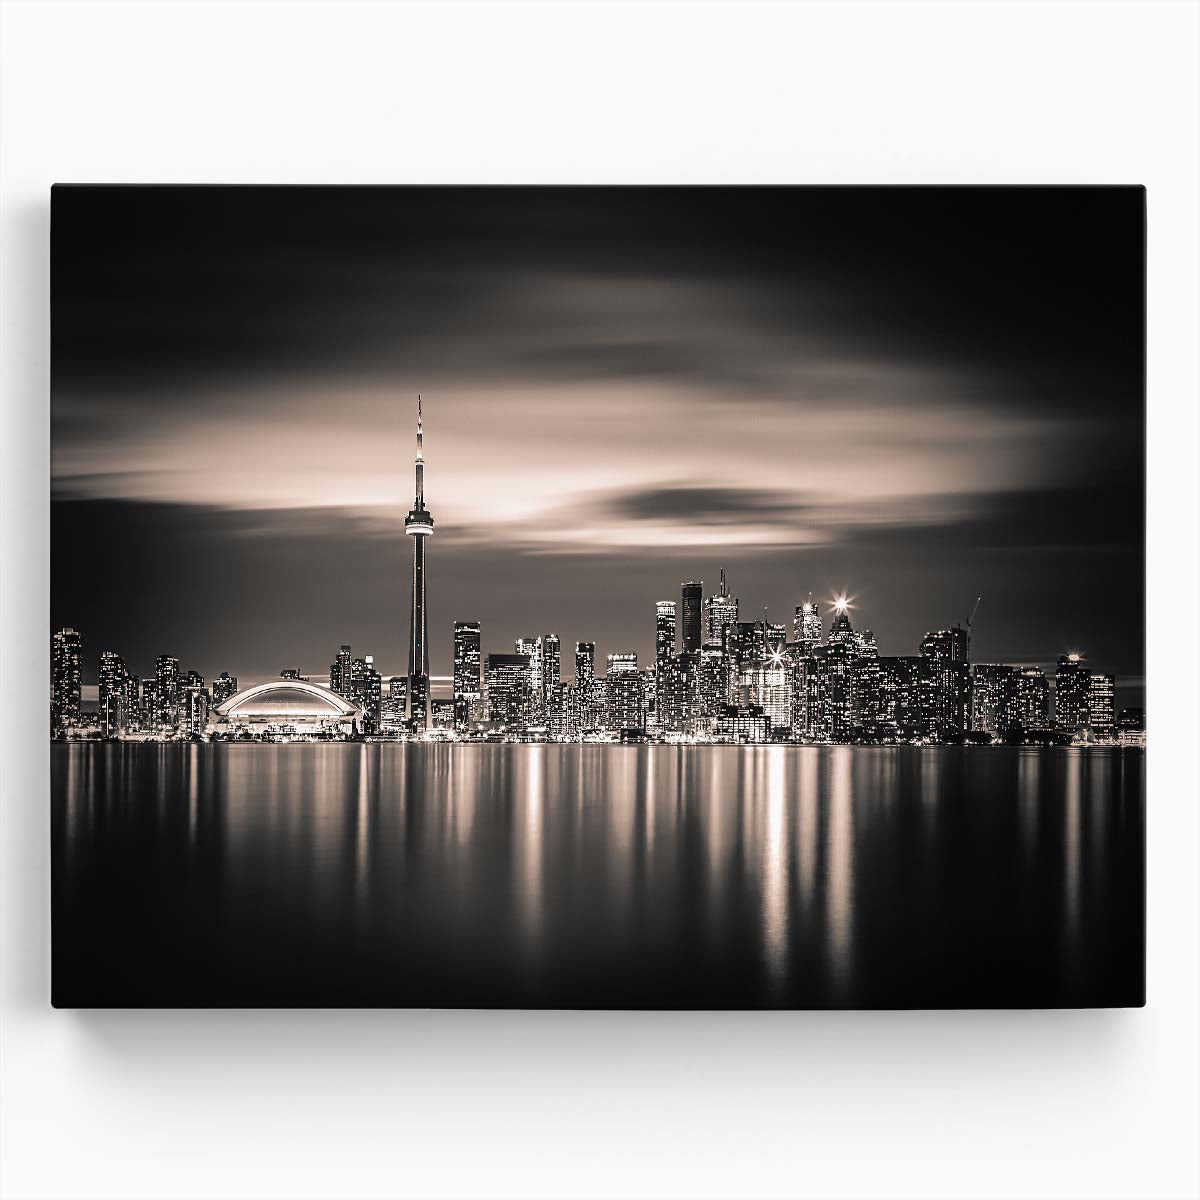 Toronto Skyline Sepia-Toned Night Photography Print Wall Art by Luxuriance Designs. Made in USA.